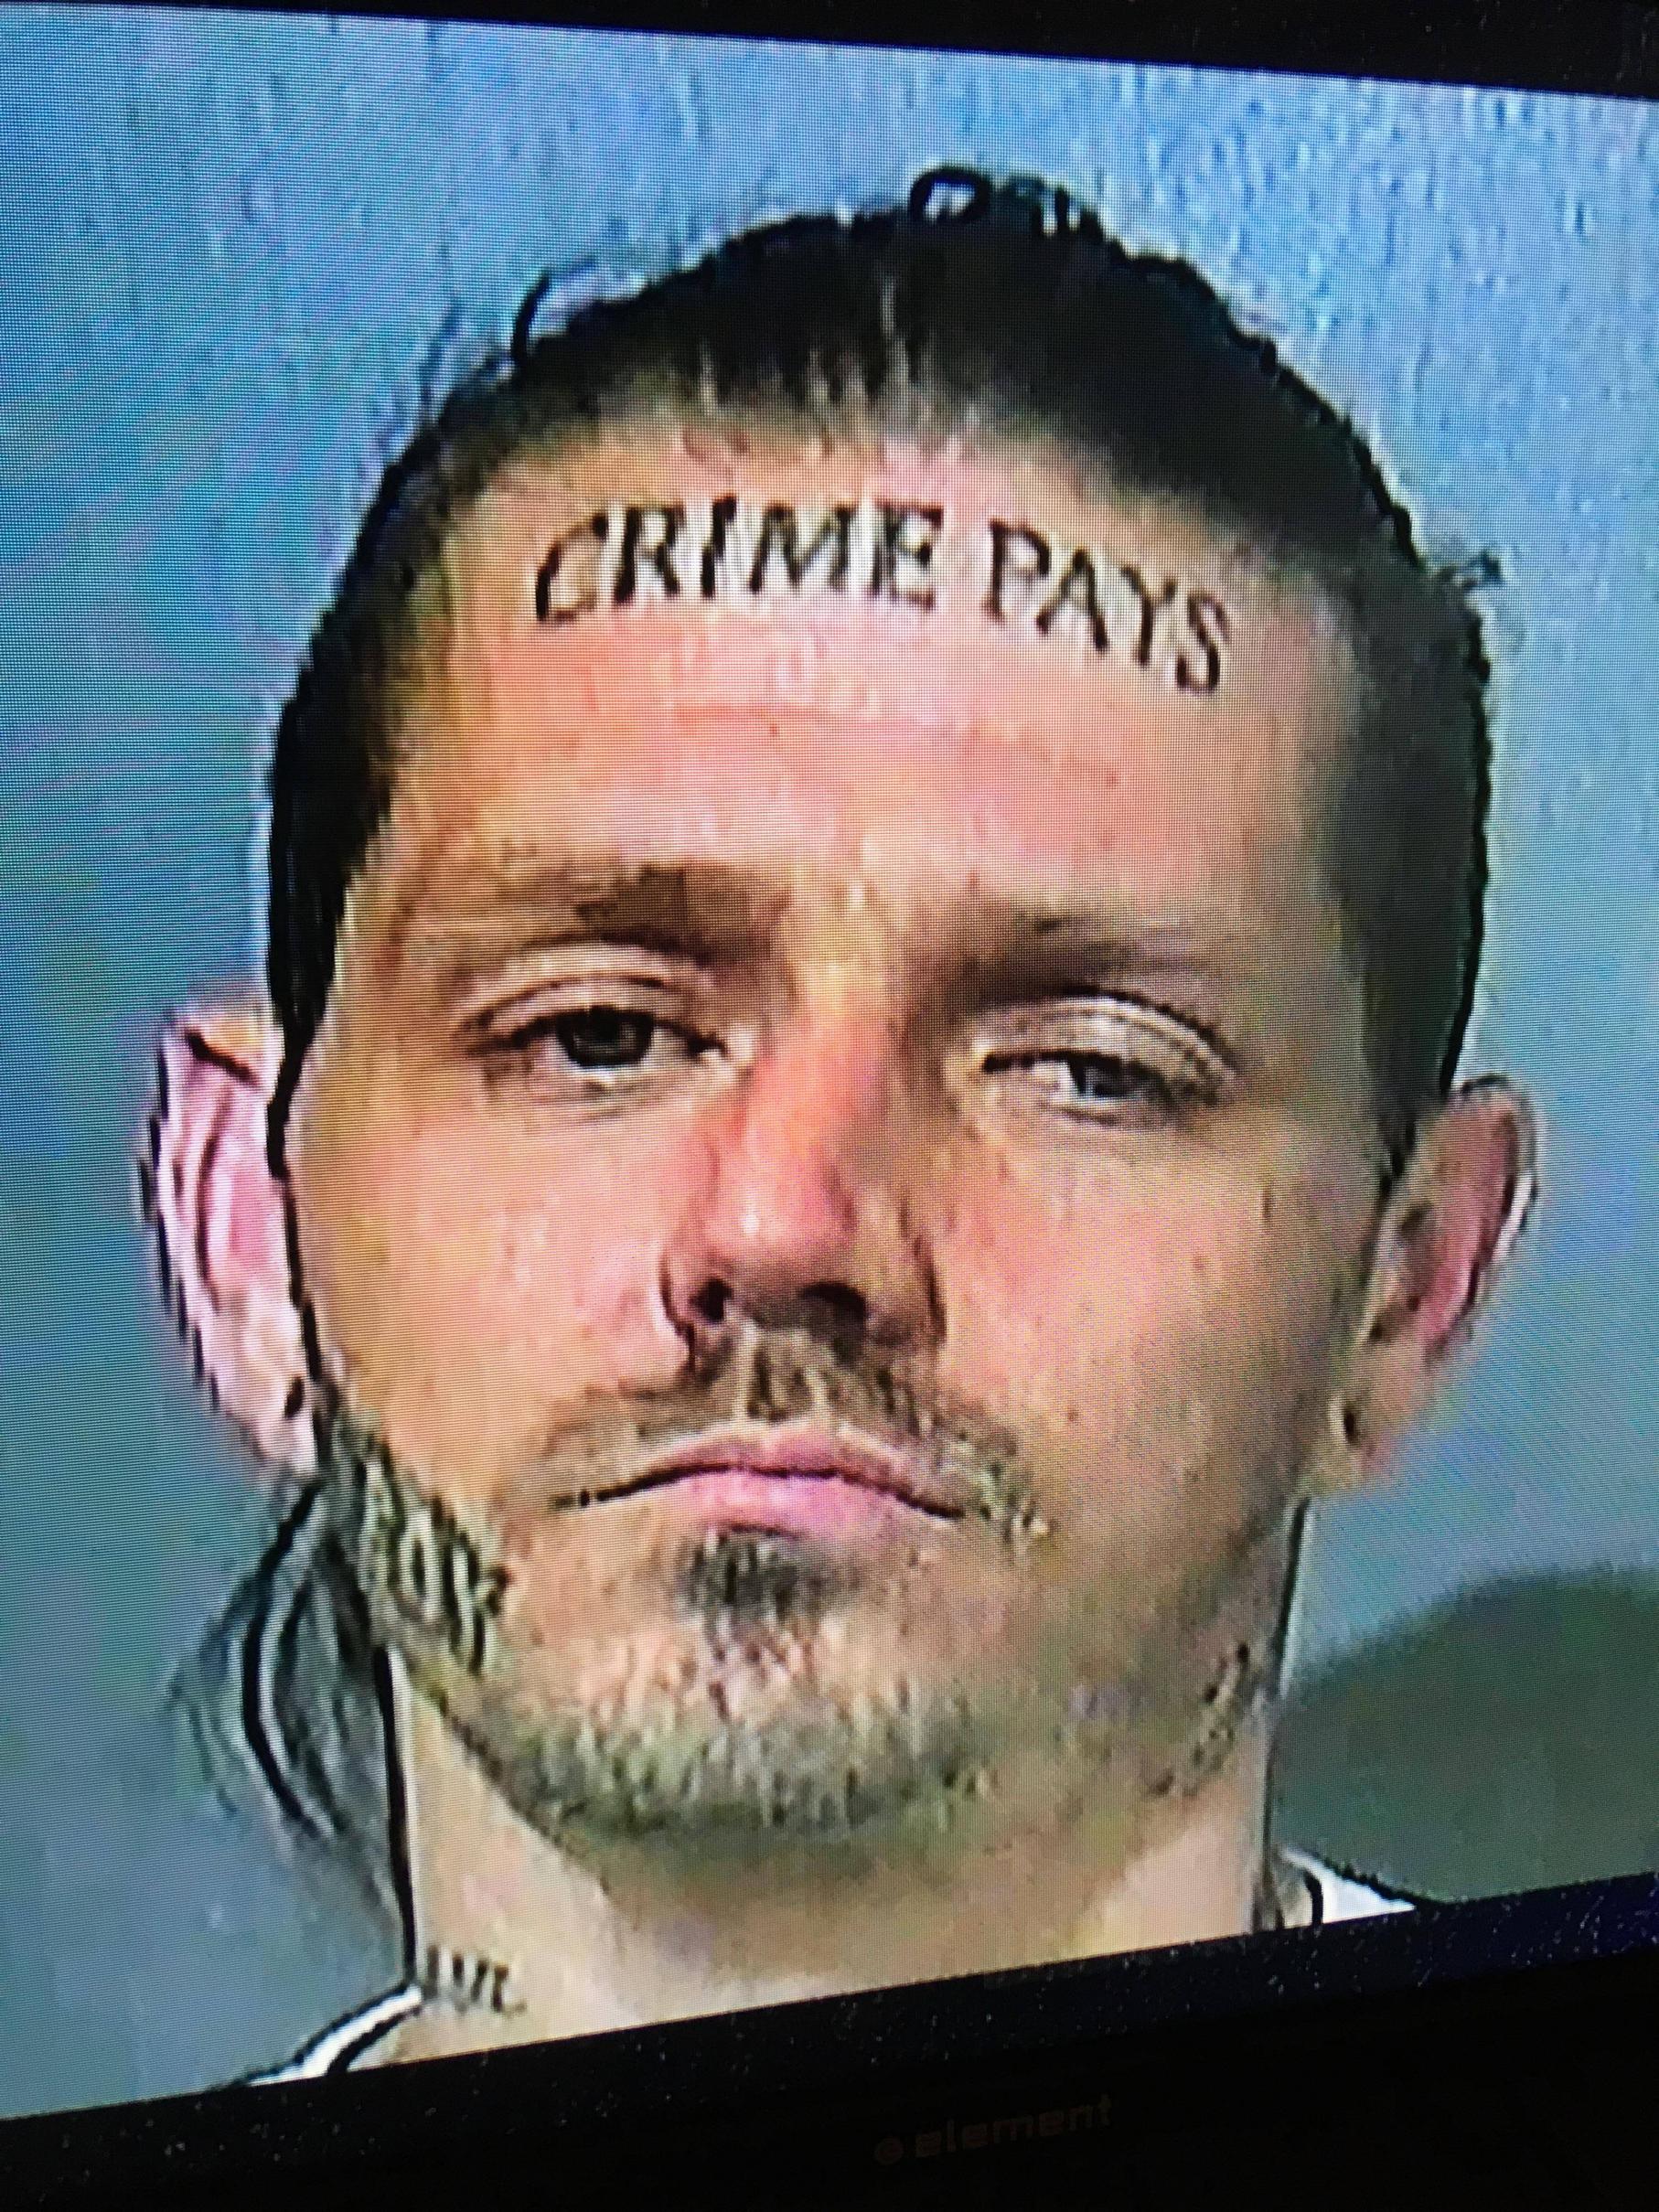 crime pays tattoo on forehead - Crime Pays